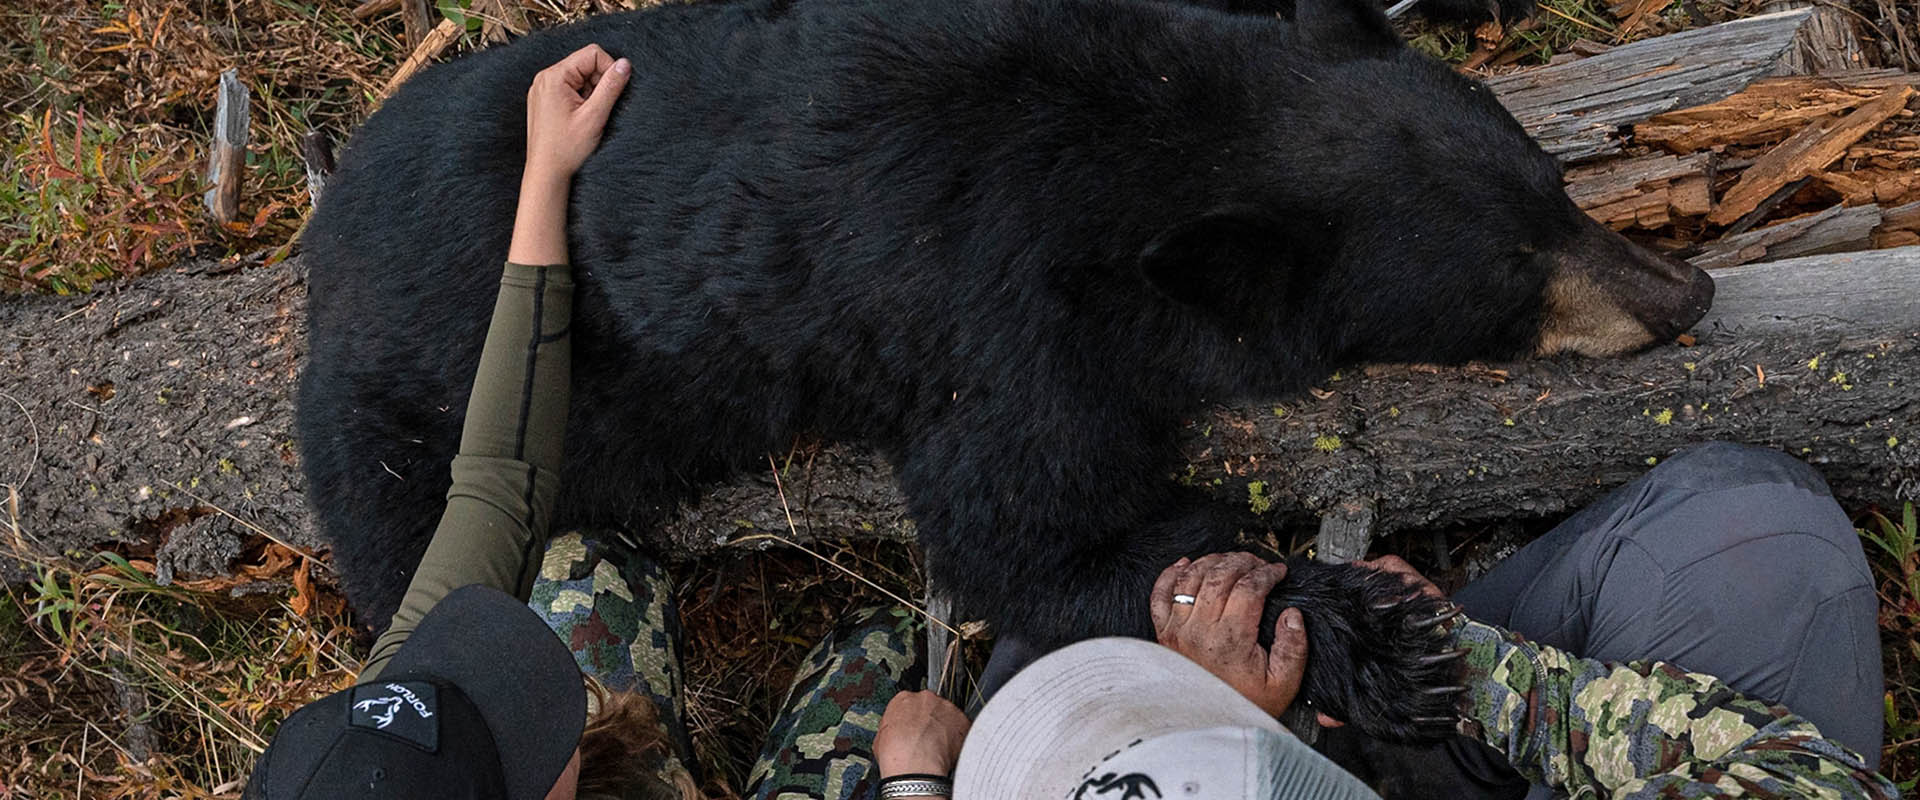 A woman and man hunter in camo gear sitting on the ground with with black bear